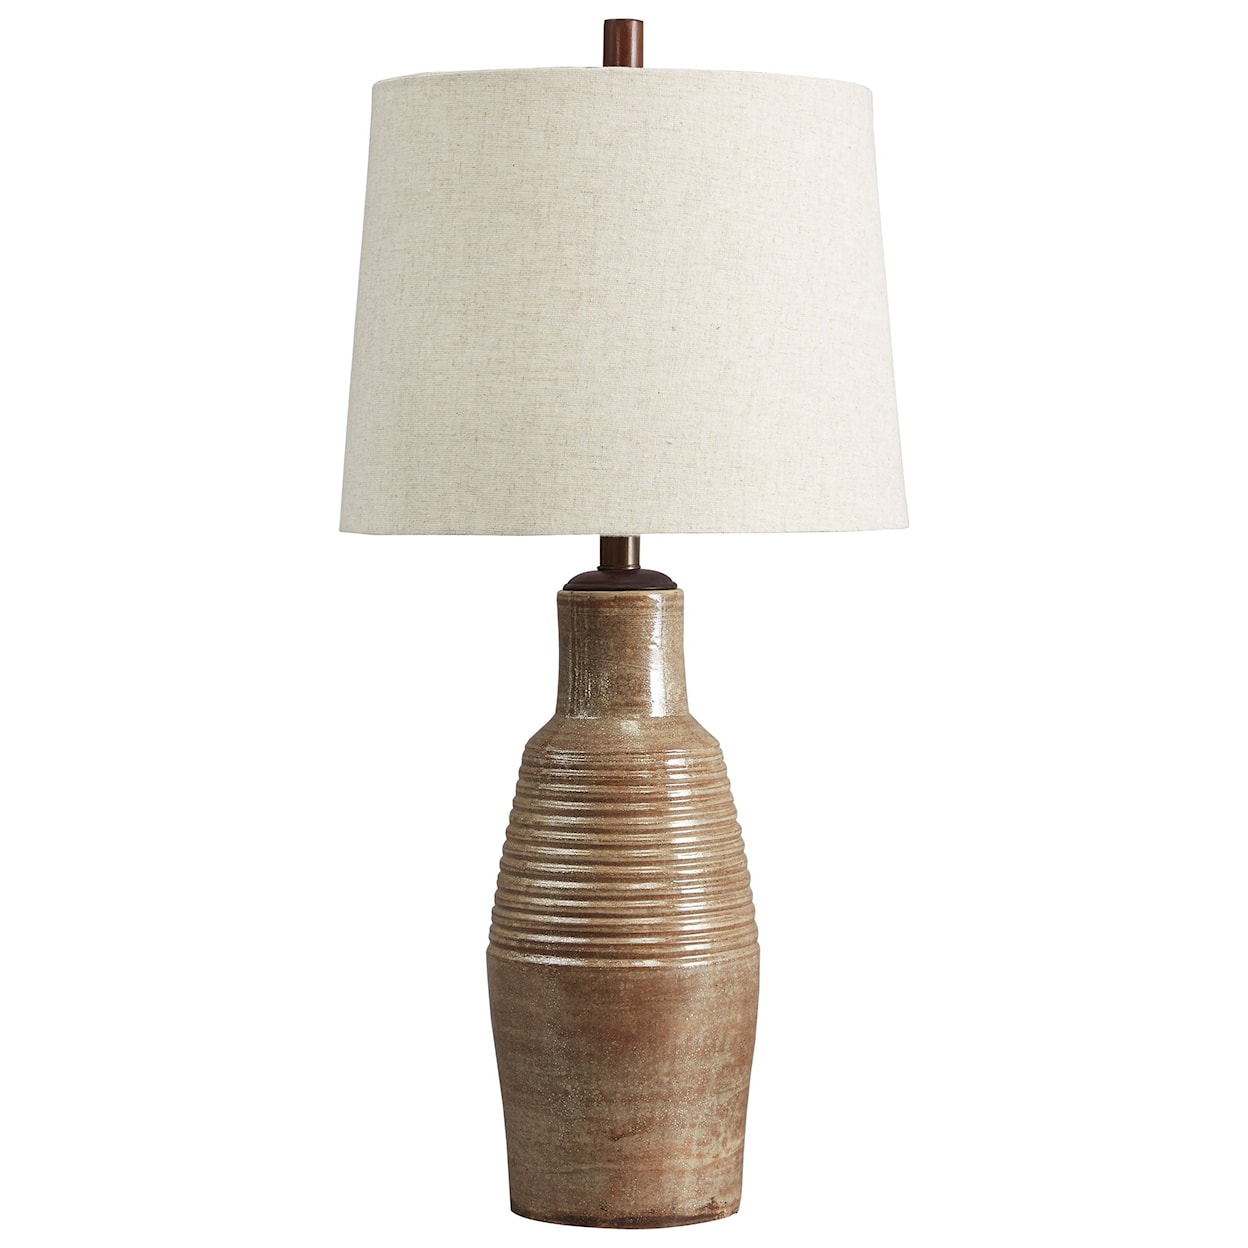 Signature Design by Ashley Lamps - Casual Calixto Terracotta Table Lamp